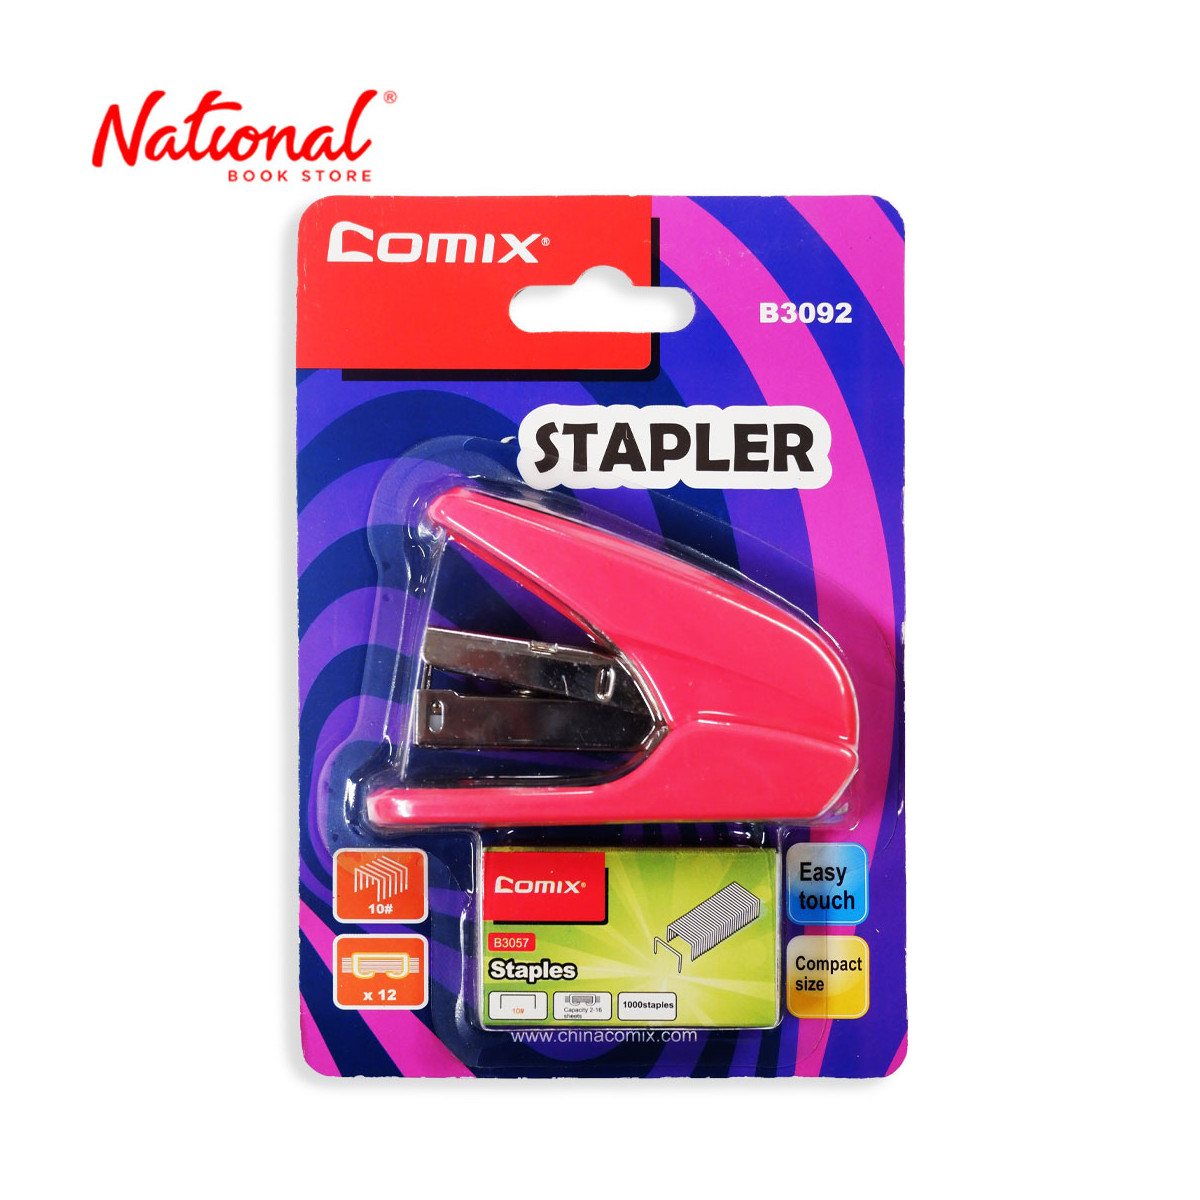 Comix Stapler Set No.10 12 sheets Half Strip With Staple Wire 1000's Pink B3092 - School & Office